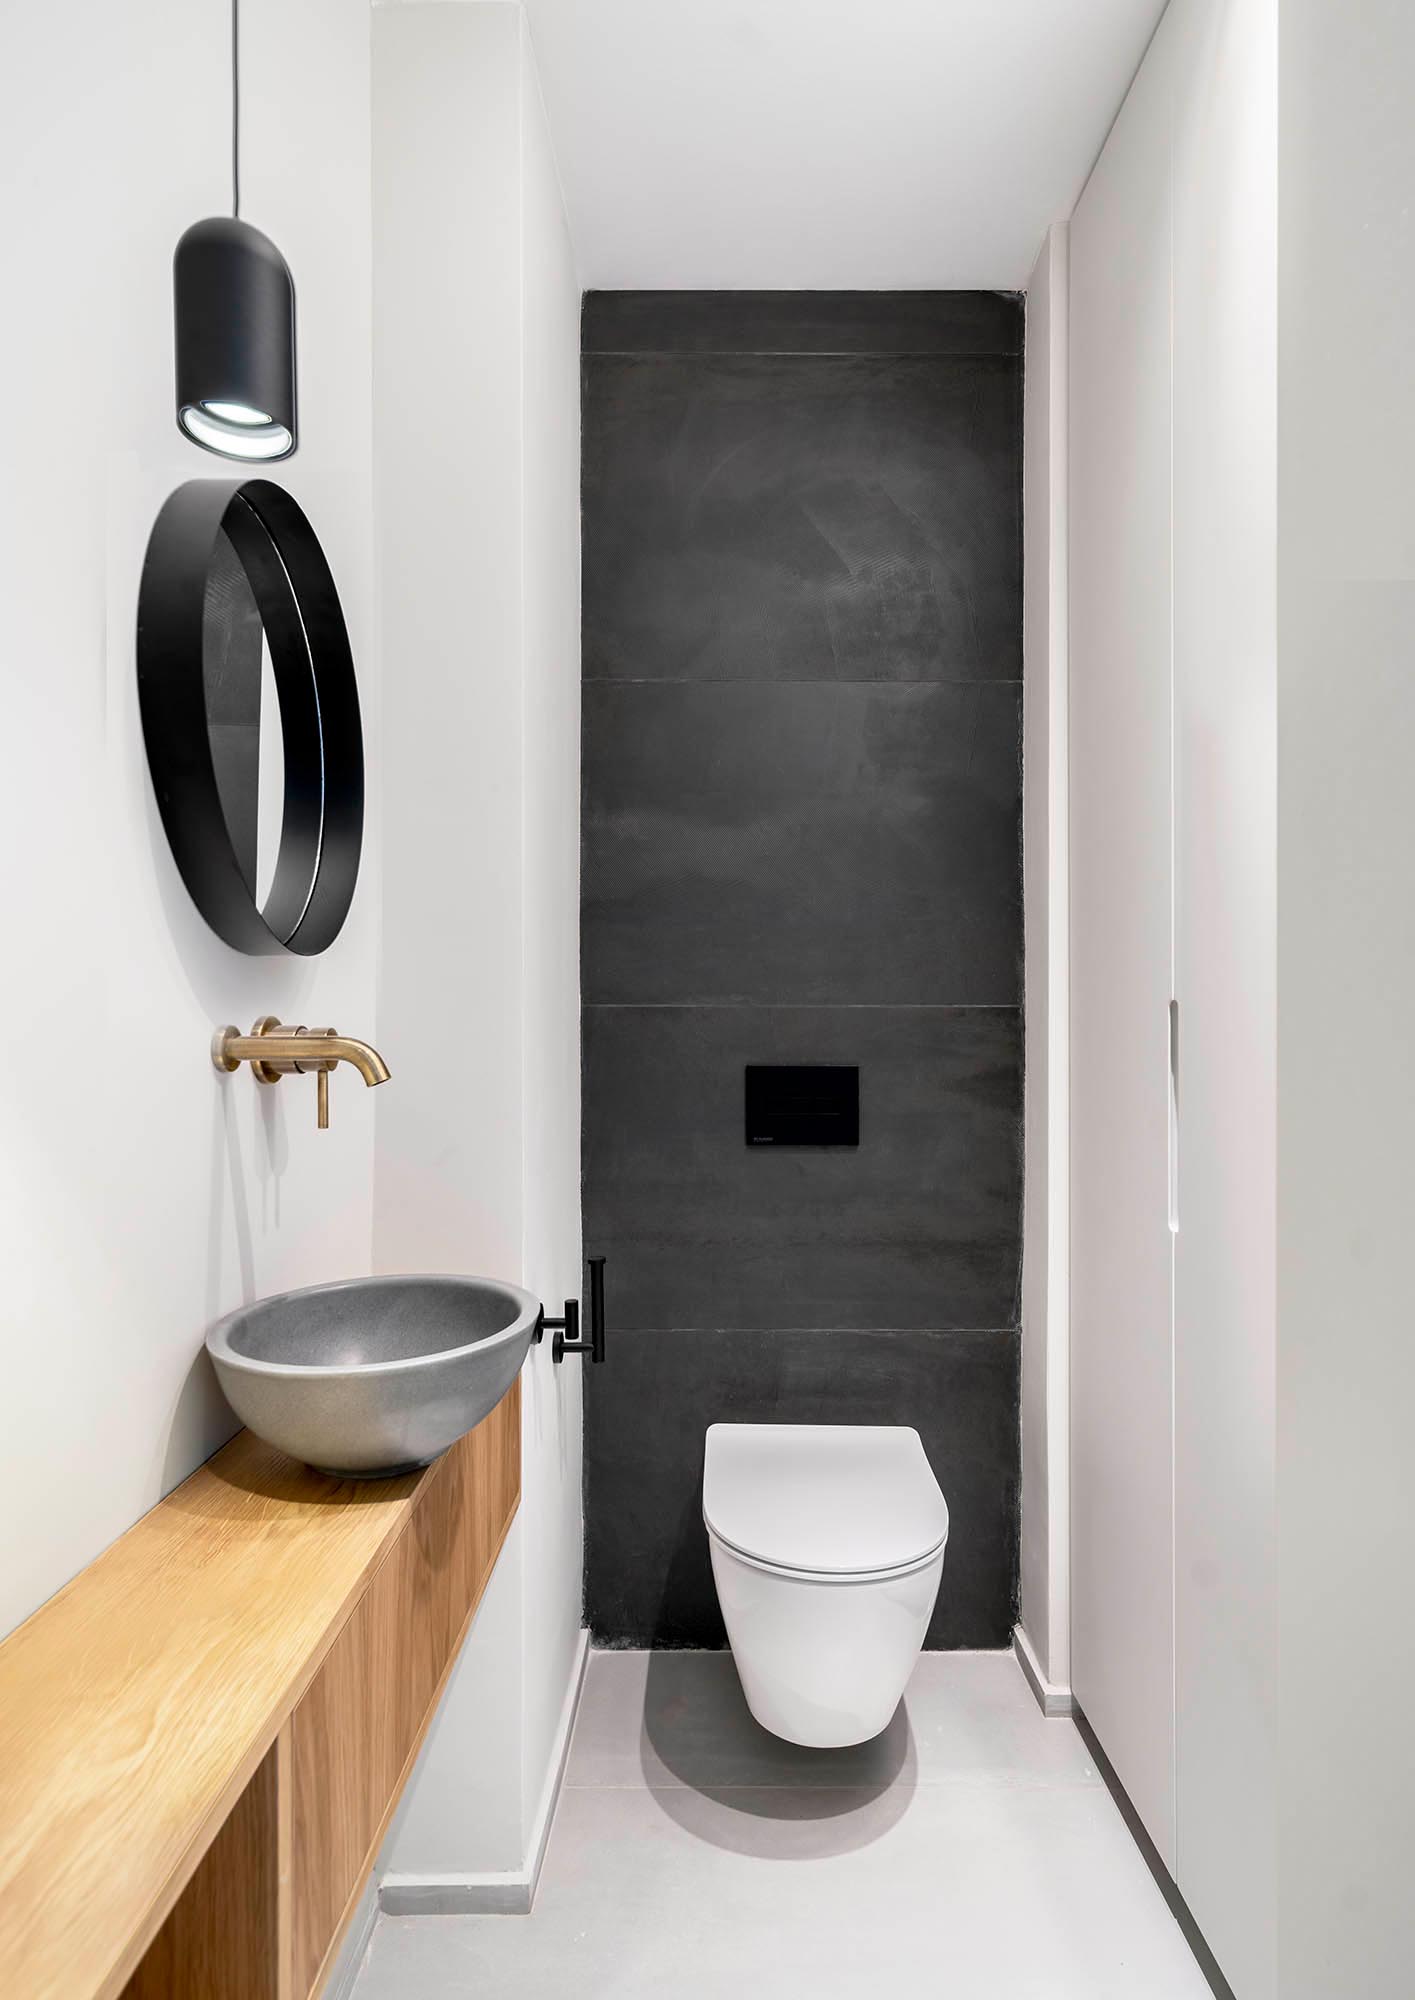 In this modern powder room, large format matte black tiles line the wall behind the toilet. The wood vanity is topped with a gray vessel sink, and bronze hardware adds a metallic element.